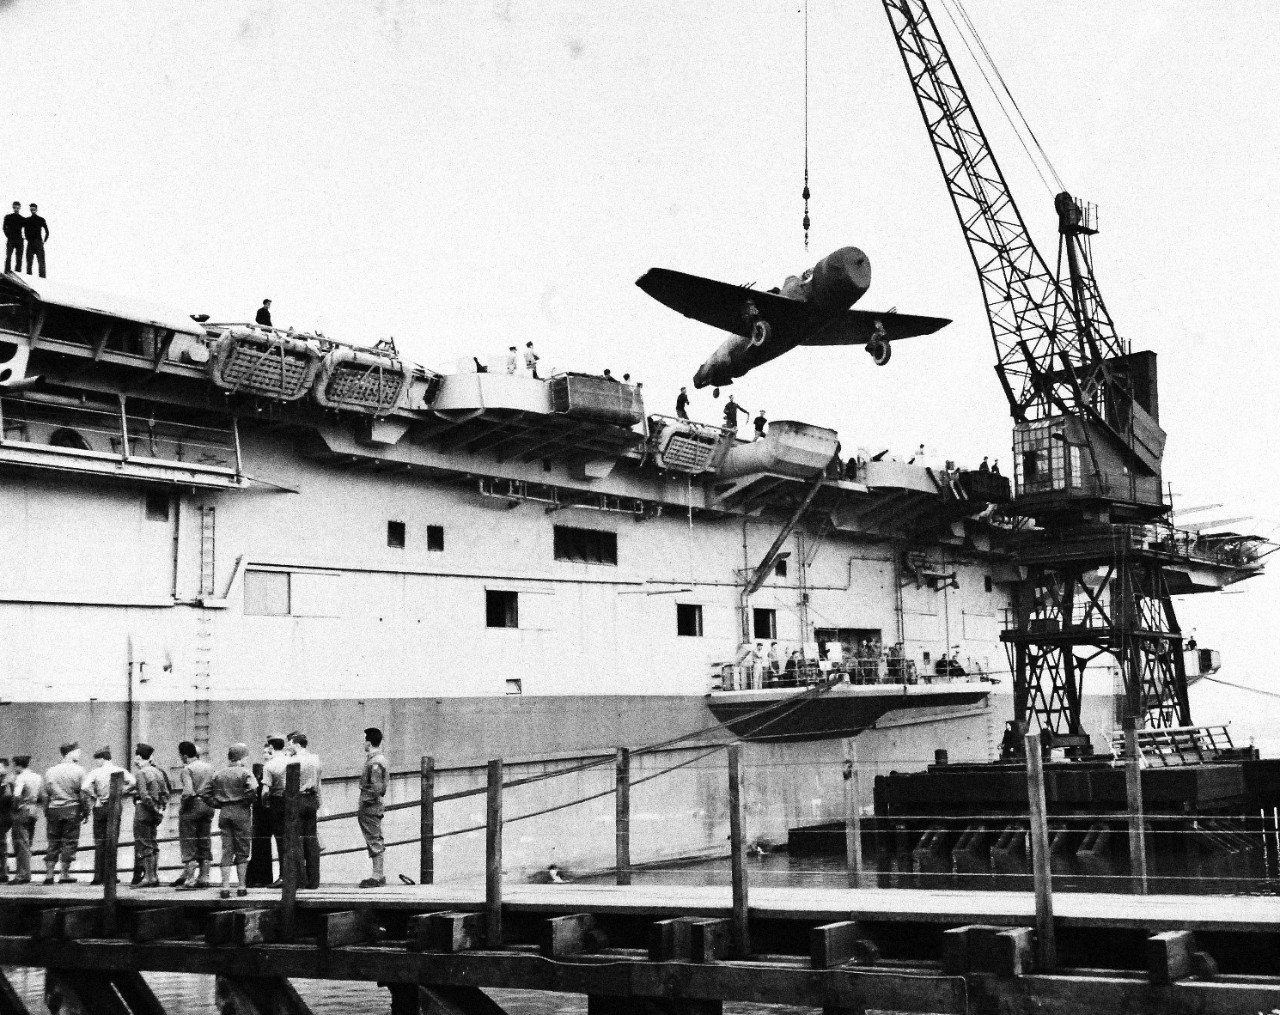 80-G-77763:  USS Block Island (CVE-21), 1943.   Unloading P-47’s at Belfast, North Ireland, July 27, 1943.  This image captures the hoisting of a plane from the flight deck.   Official U.S. Navy Photograph, now in the collections of the National Archives.  (2015/03/04). 